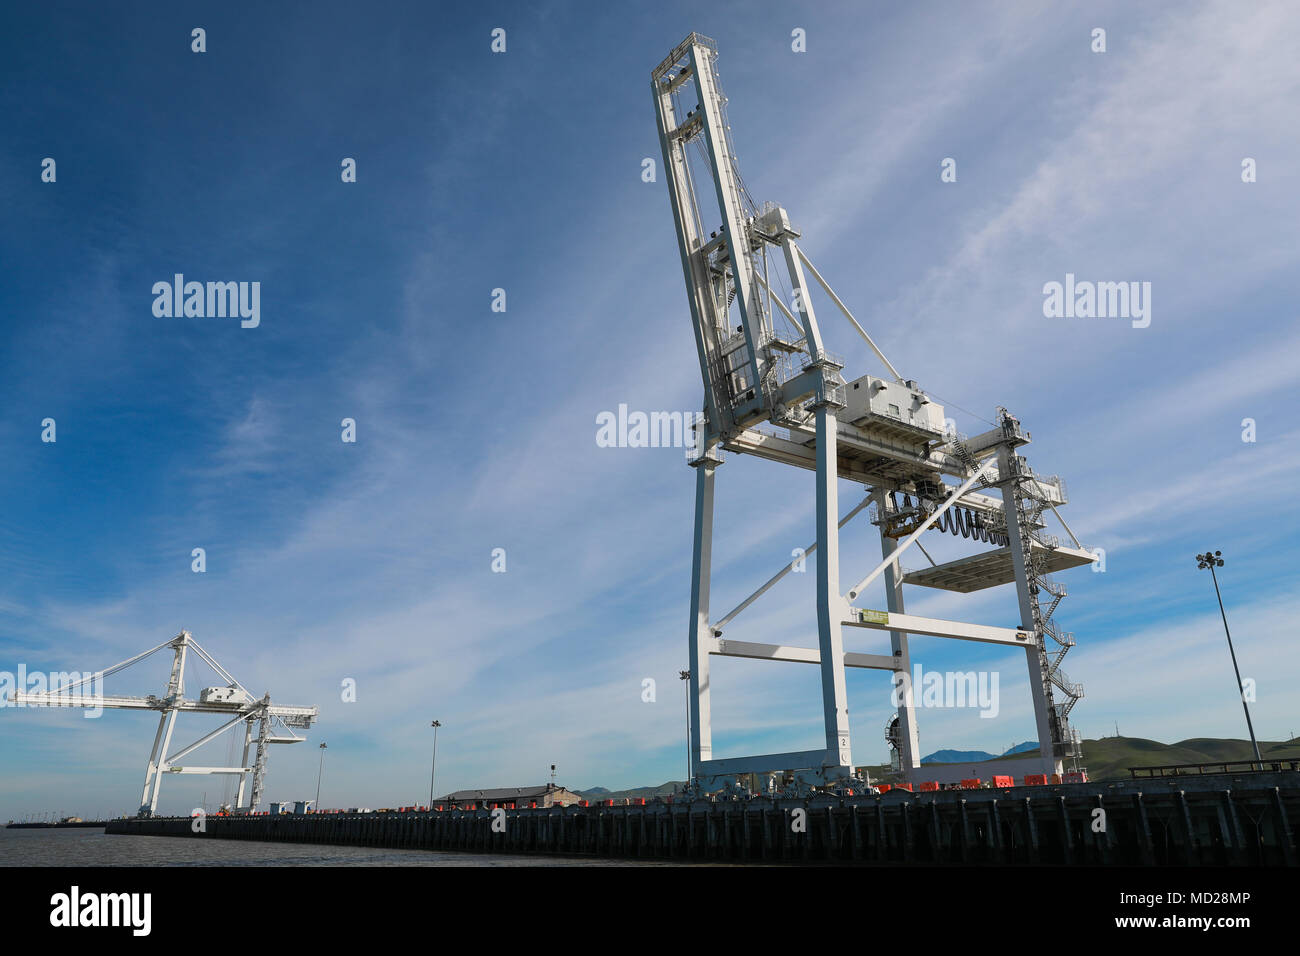 Gantry Cranes at Military Ocean Terminal Concord, California, Mar. 6, 2018. Trans Mariner 18 West is a real-world strategic mission utilizing U.S. Army Reserve and Active component Soldiers to conduct Port Operations allowing Army materiel and munitions containers for travel onward.  (U.S. Army photo by Sgt. Eben Boothby) Stock Photo